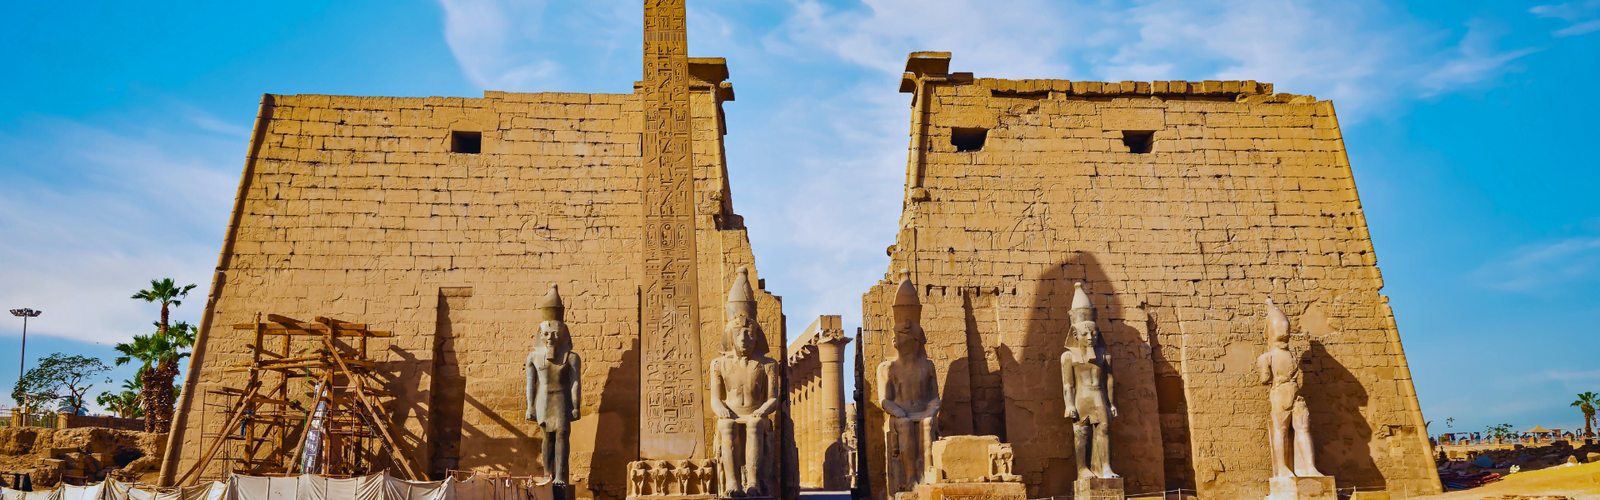 The Luxor Temple in Egypt